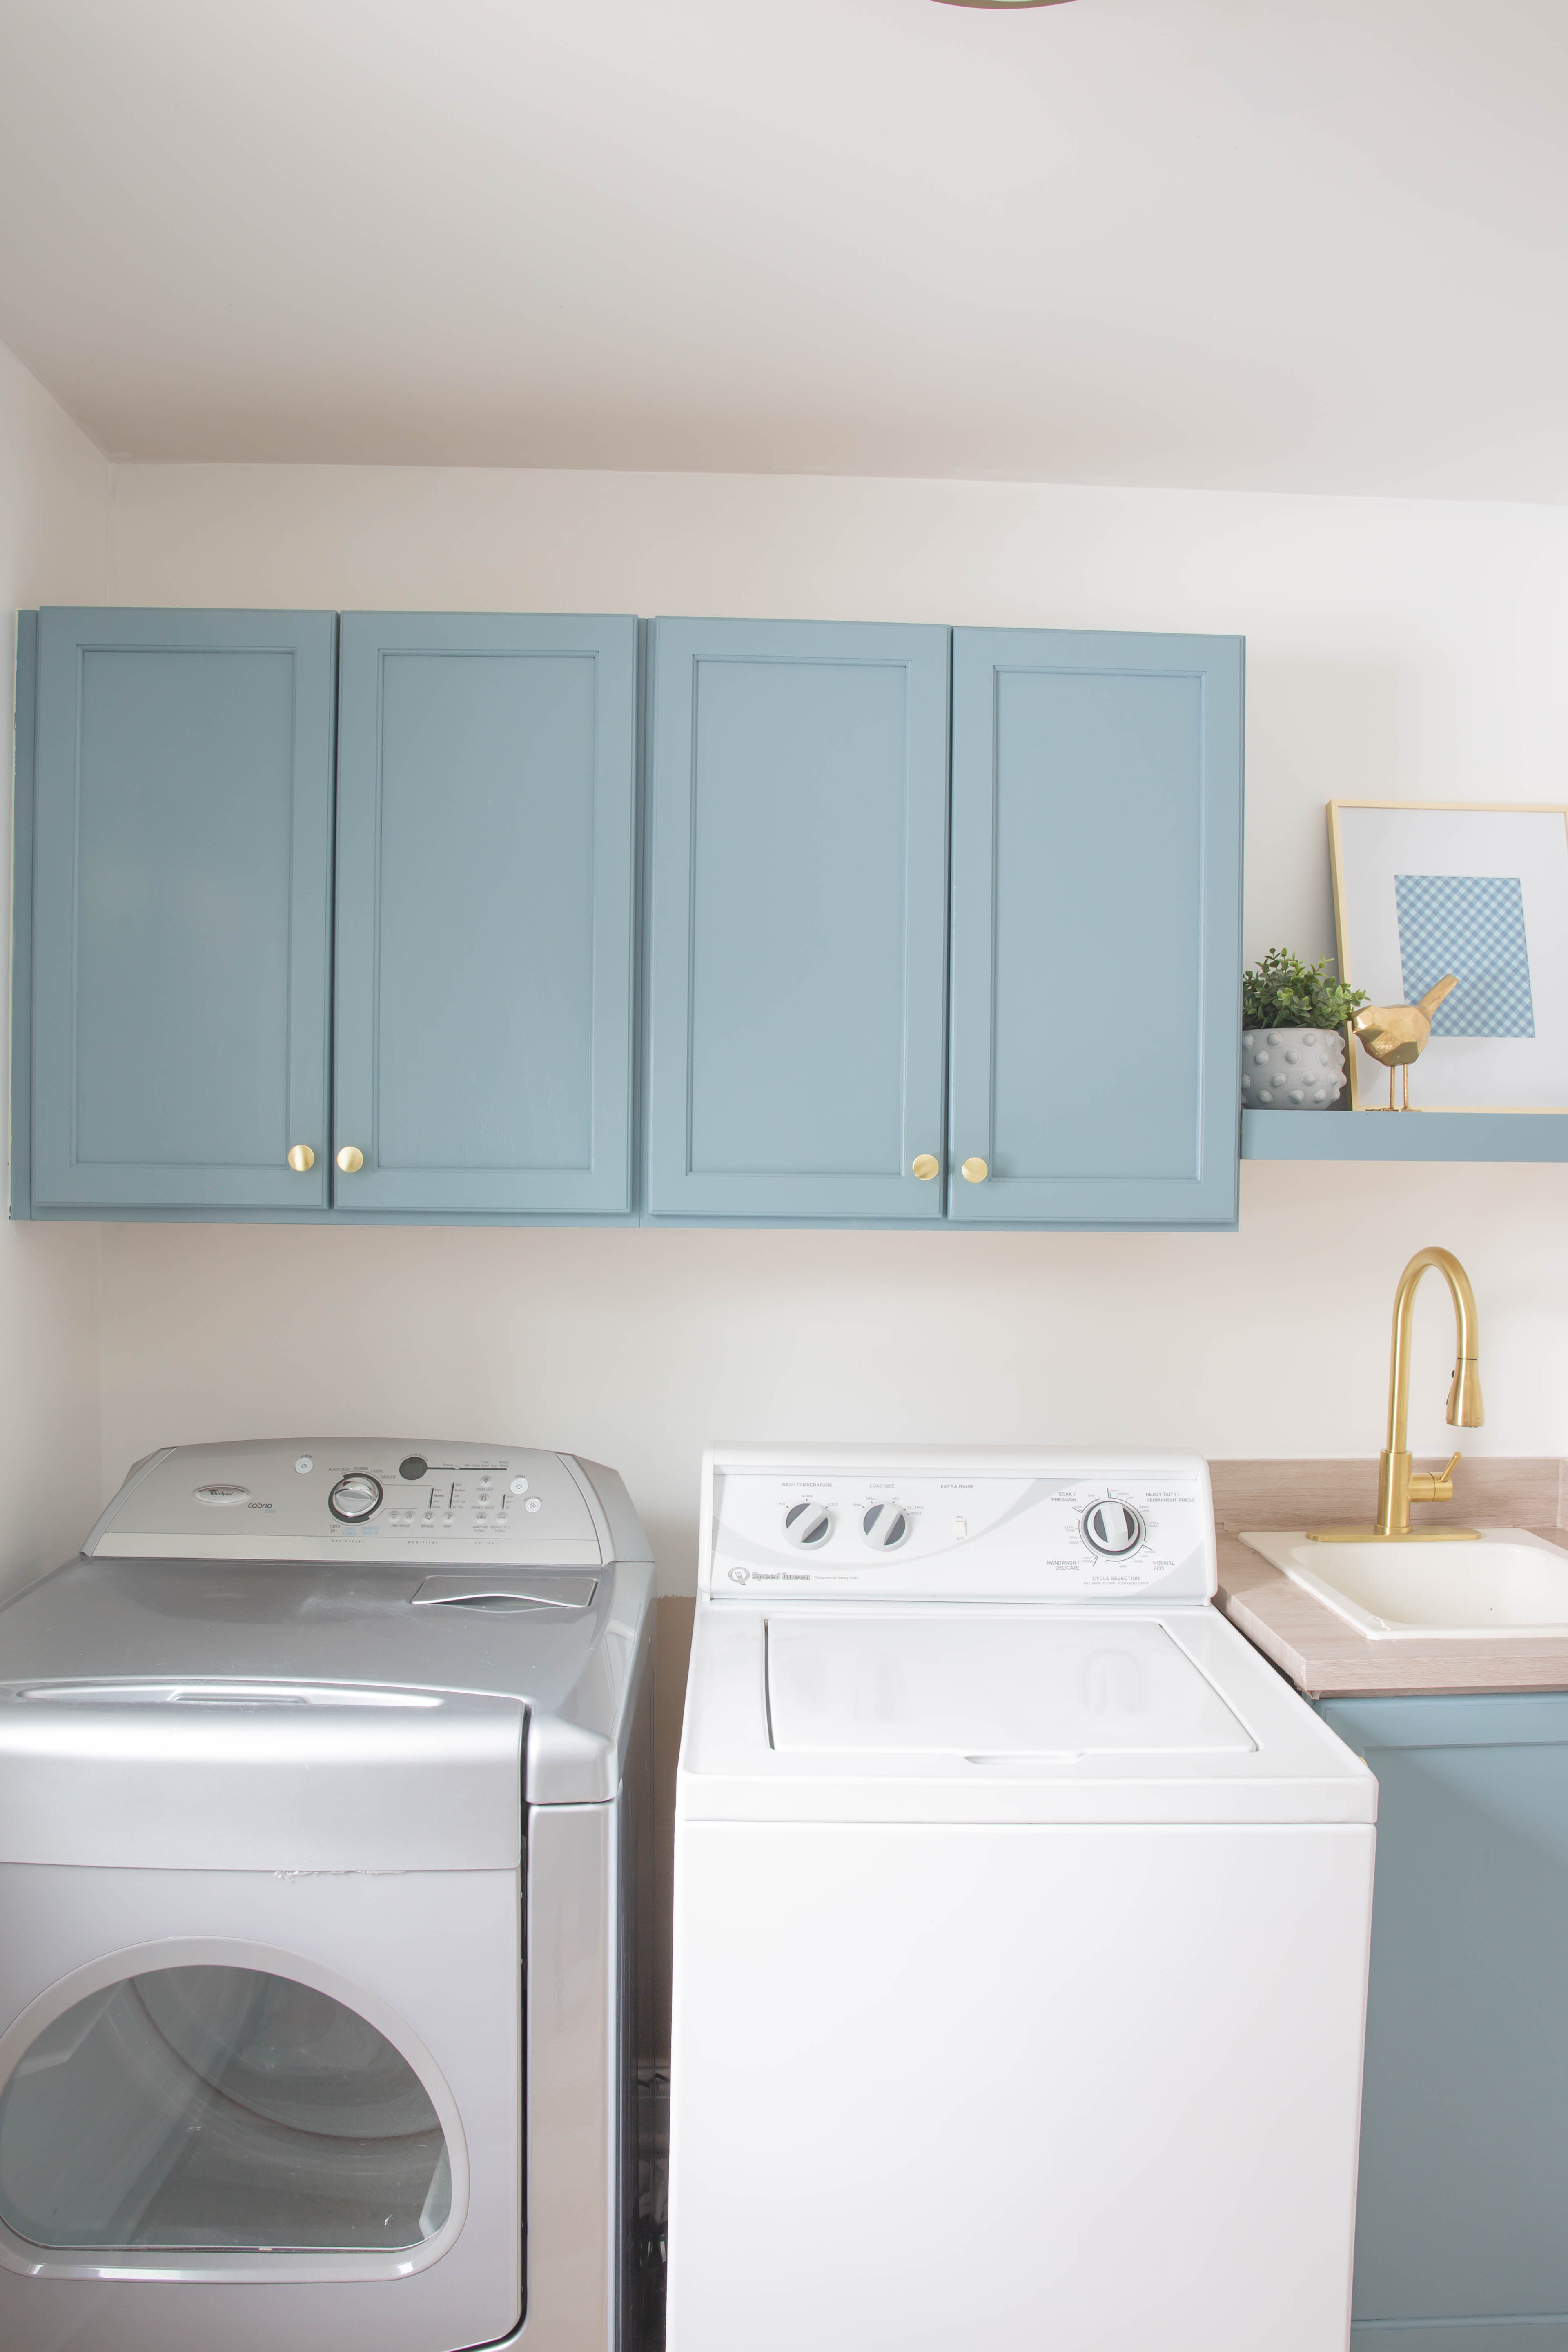 DIY Laundry Room Makeover - Blue Laundry Room Cabinets - Light Blue Laundry Room Cabinets - DIY Laundry Room - Small Laundry Room Makeover - Laundry Room Makeover on a Budget